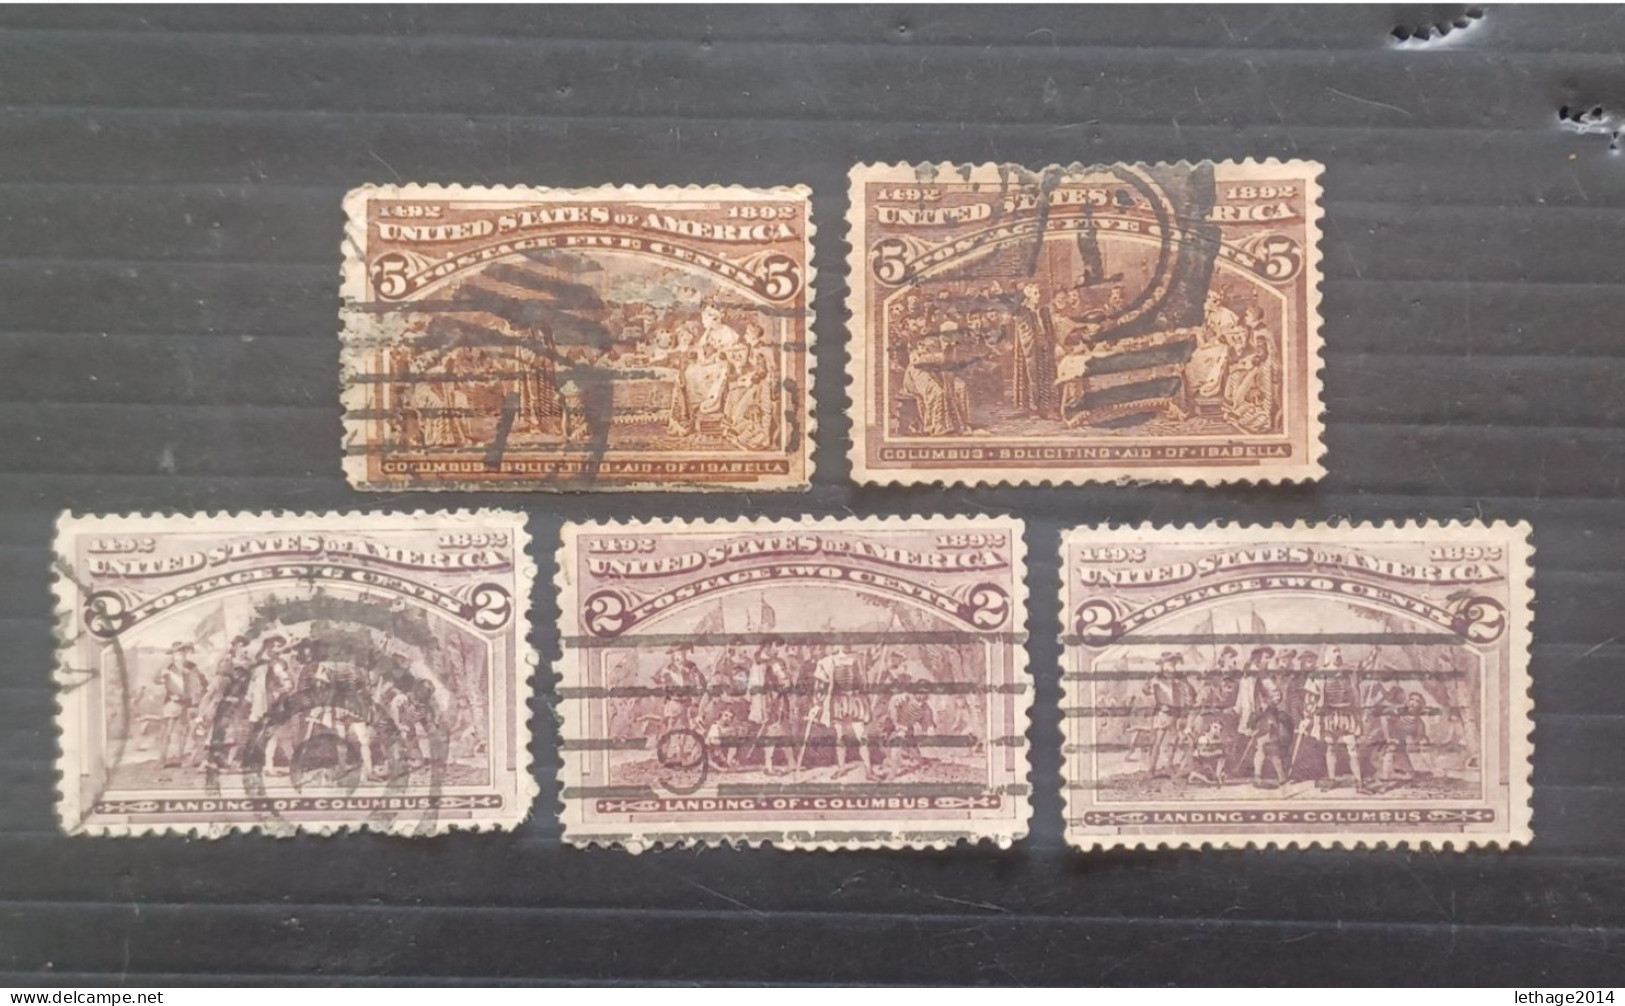 UNITED STATE 1893 COLUMBIAN EXPOSITION MNHL + BIG STOCK LOT MIX 85 SCANNERS PERFIN TAX WASHINGTON STAMPS MNH FRAGMANT - Unused Stamps